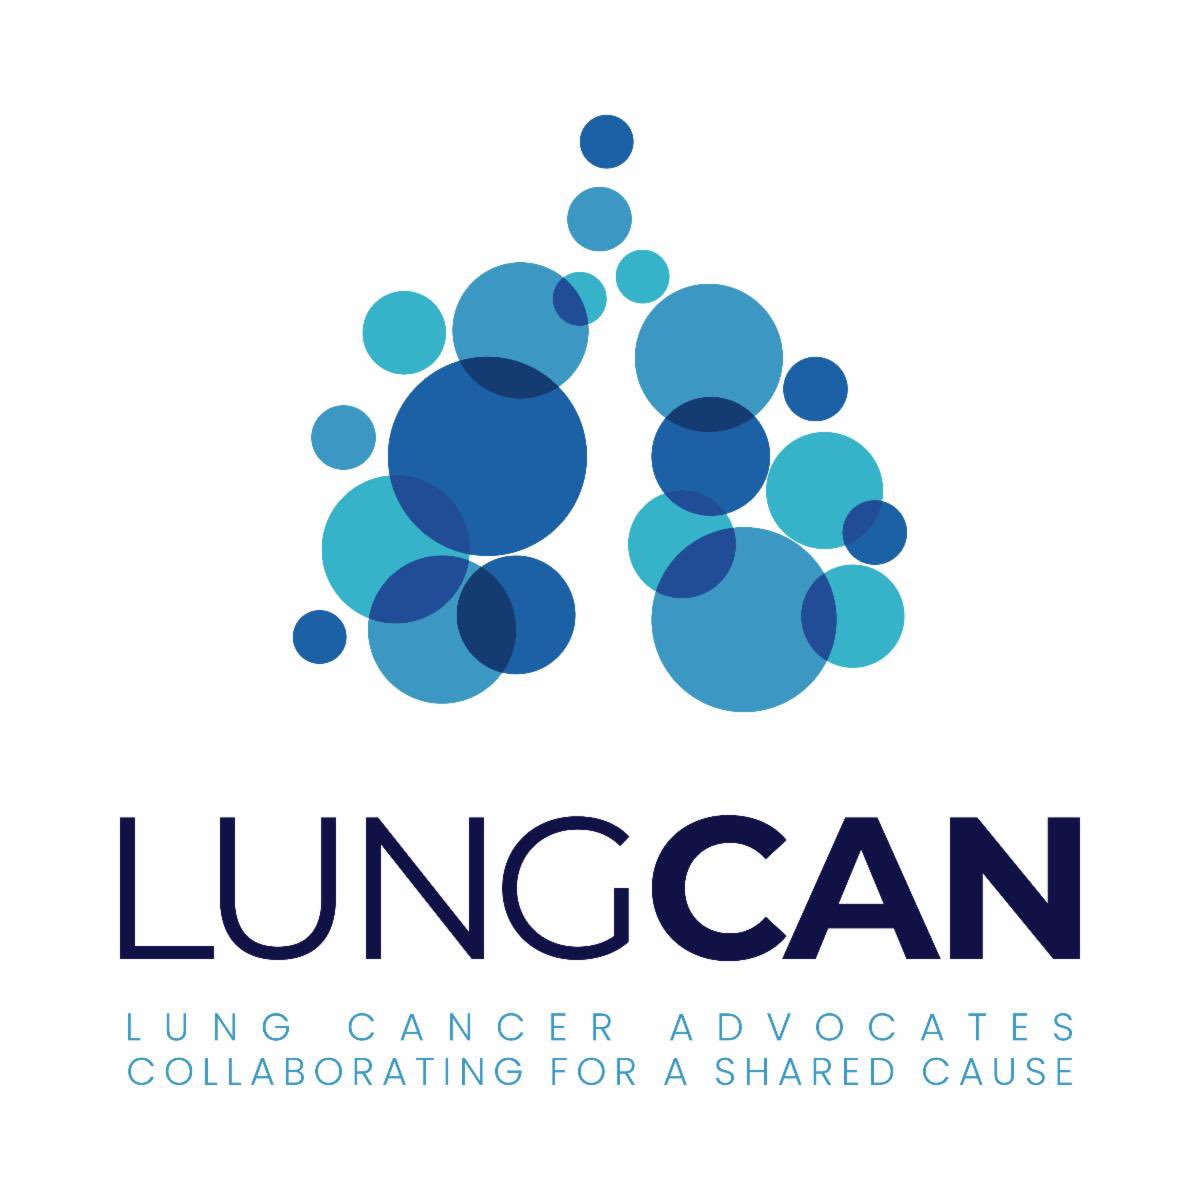 You are invited to attend @LungCAN’s speaker training workshop on 5/15 1-3:00 pm ET via Zoom. The goal of this free workshop is to give advocates skills that will make them feel and BE great speakers. No previous experience necessary: form.jotform.com/240866025269057